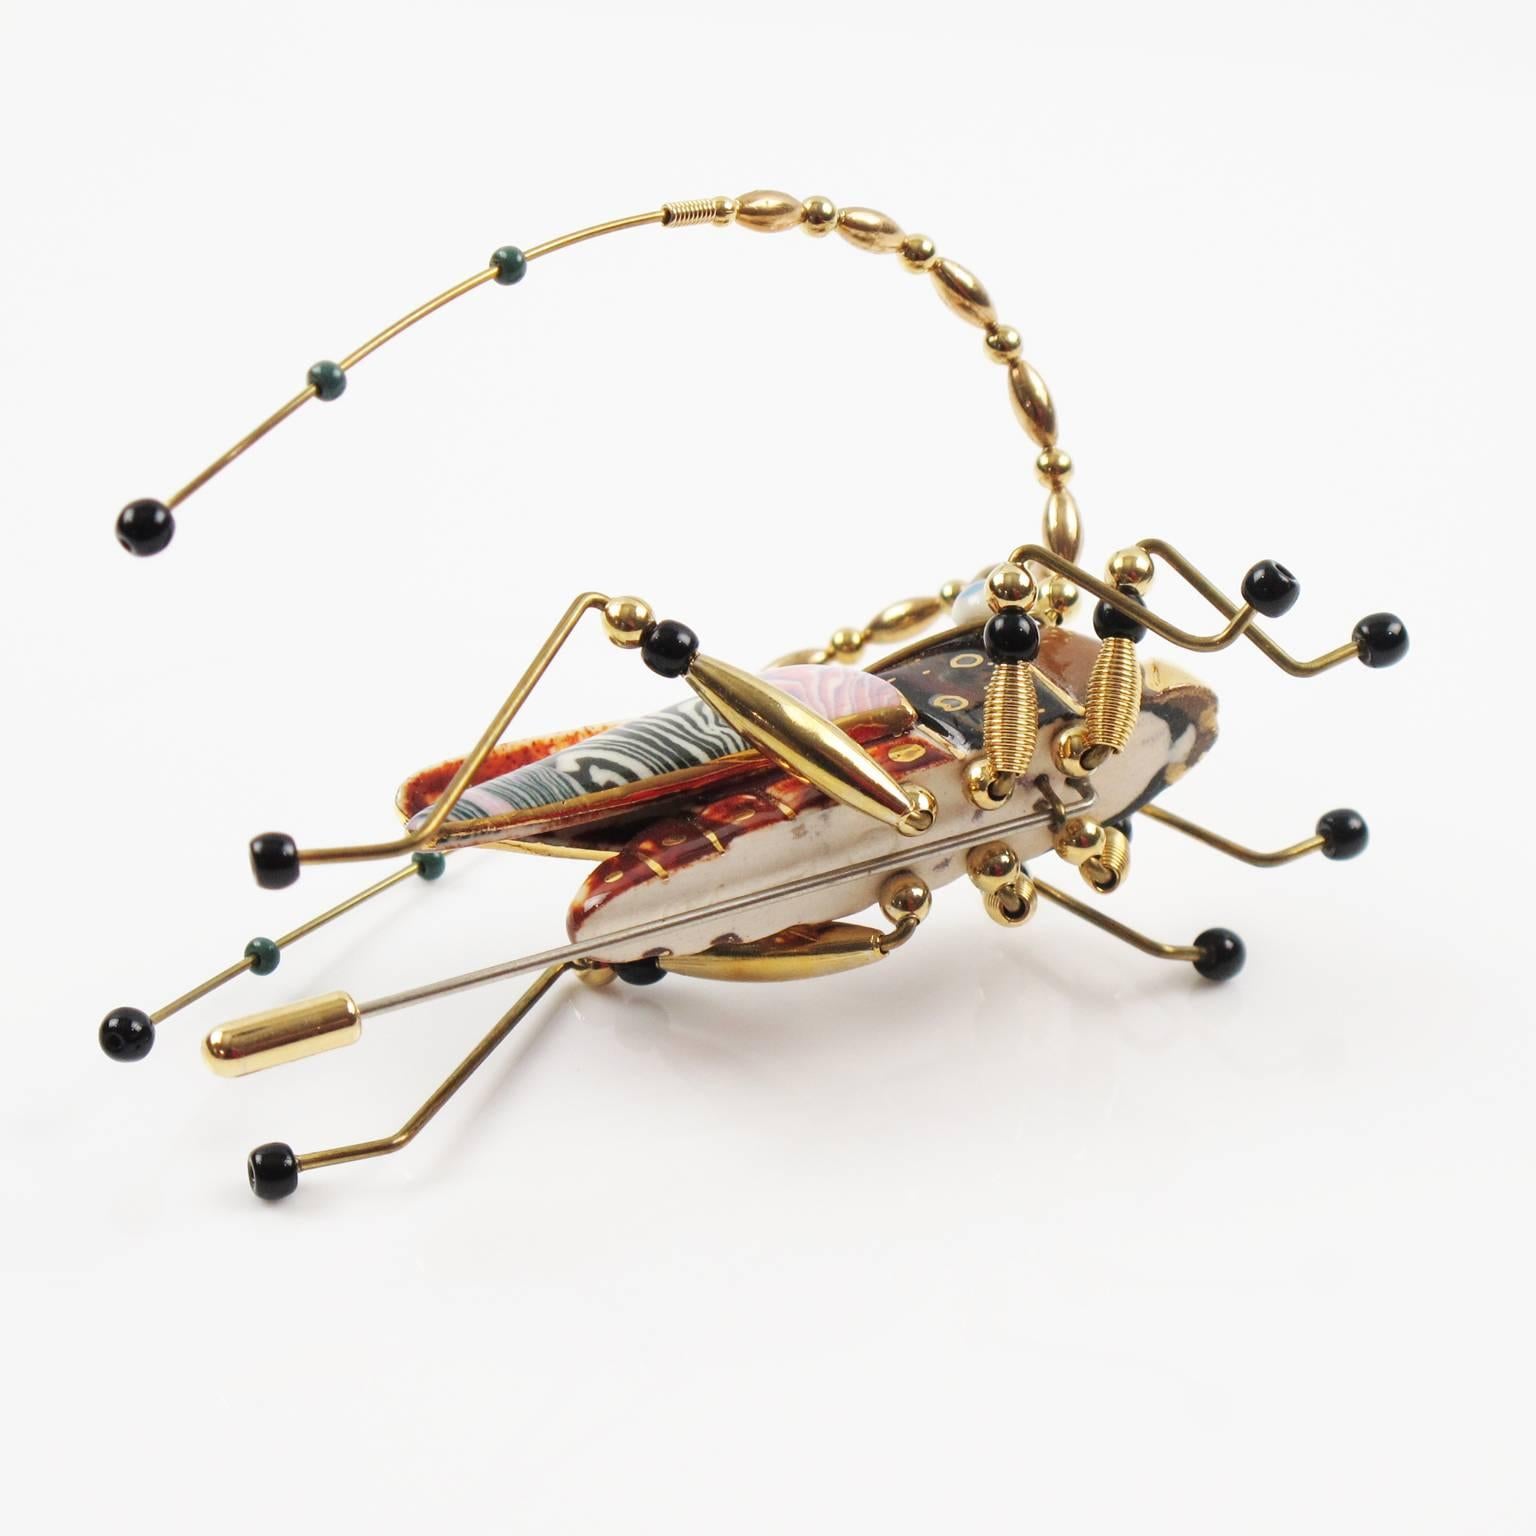 Enameled Porcelain Grasshopper Pin Brooch by Cynthia Chuang for Jewelry 10 1